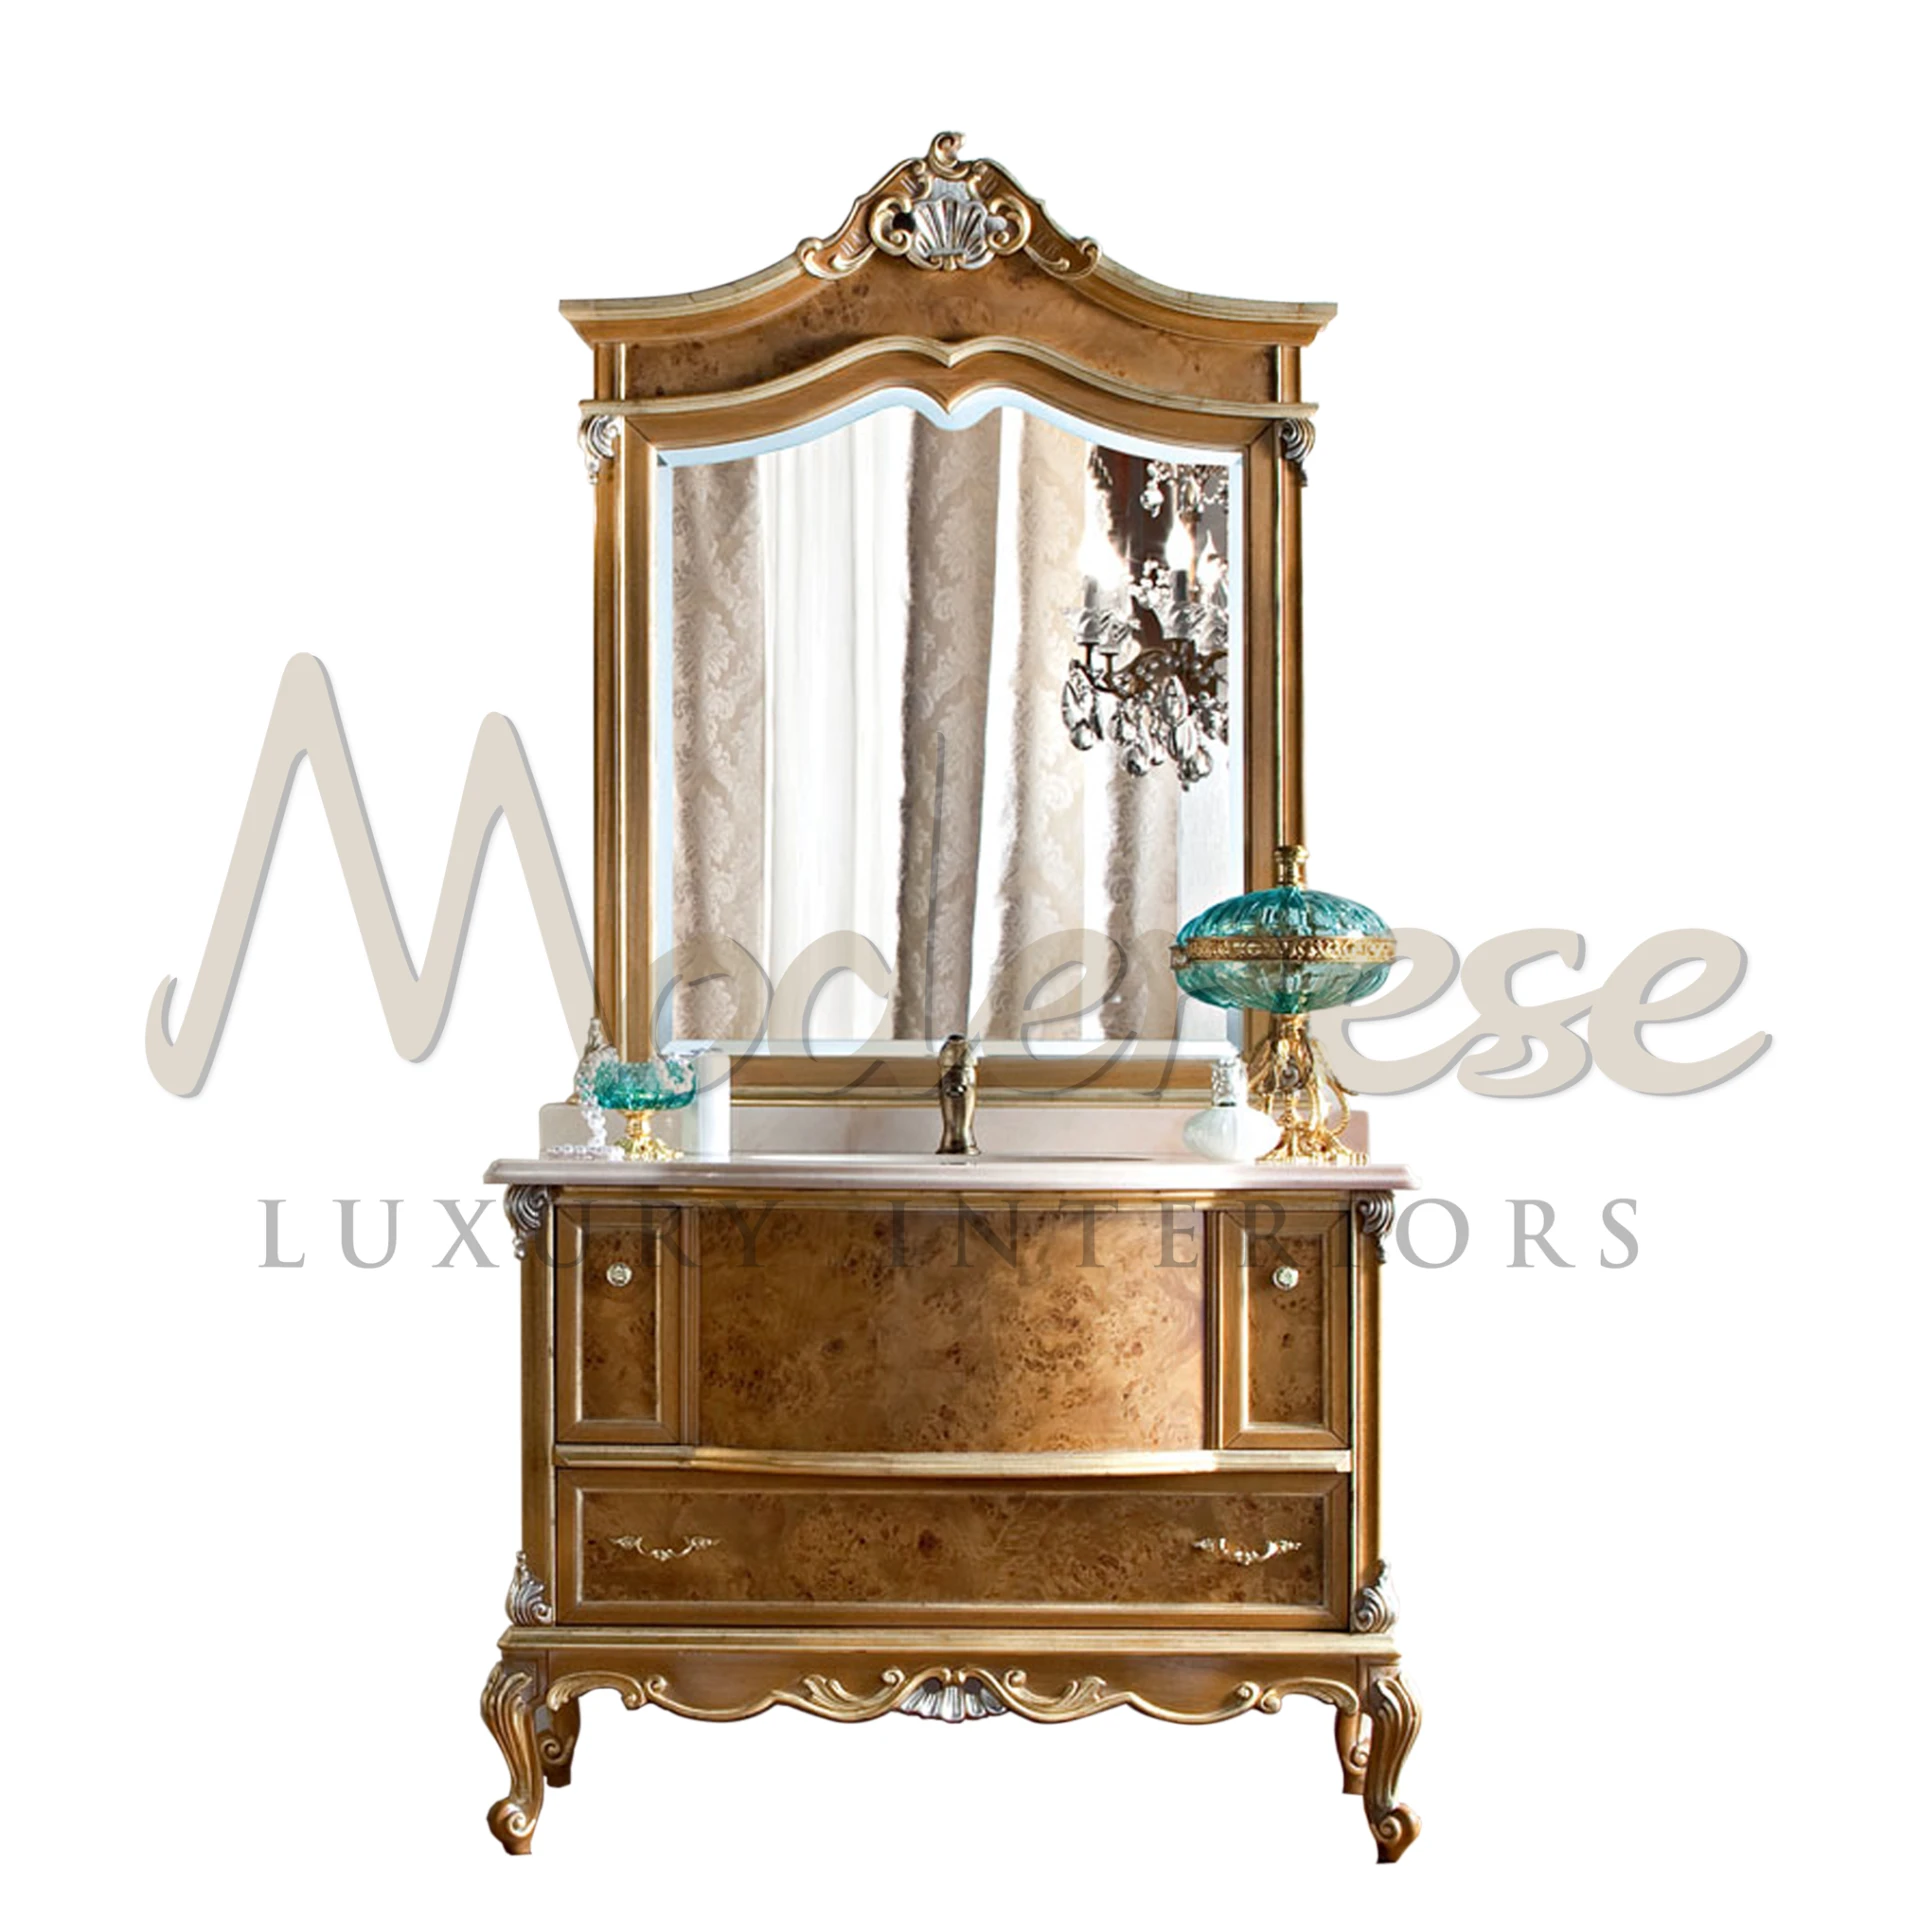 Wood radica briar cabinet for luxurious bathroom design with gold leaf and white marble top